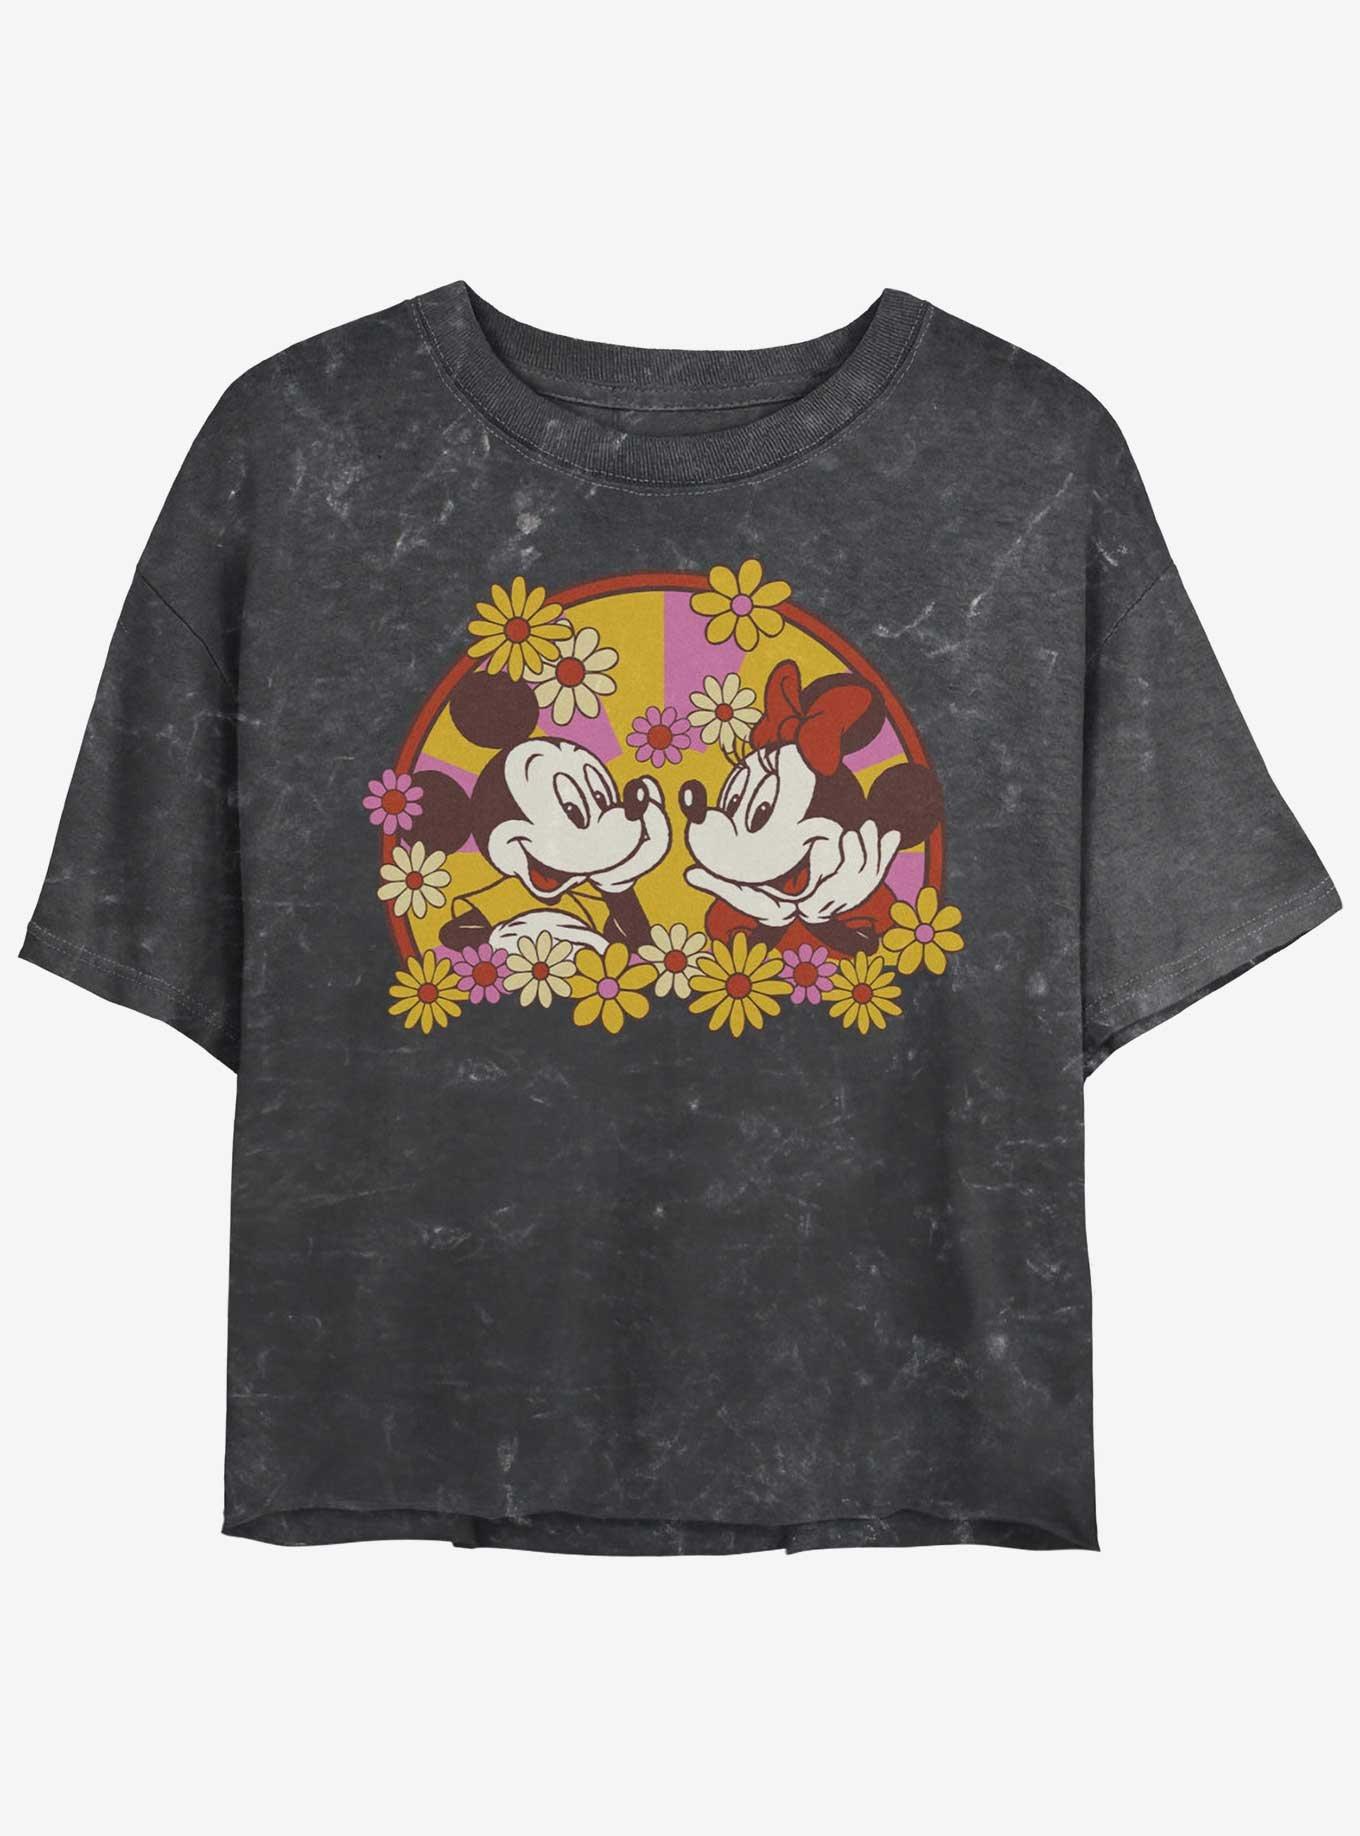 Disney Mickey Mouse & Minnie Mouse Love Bloom Mineral Wash Girls Crop T-Shirt, BLACK, hi-res